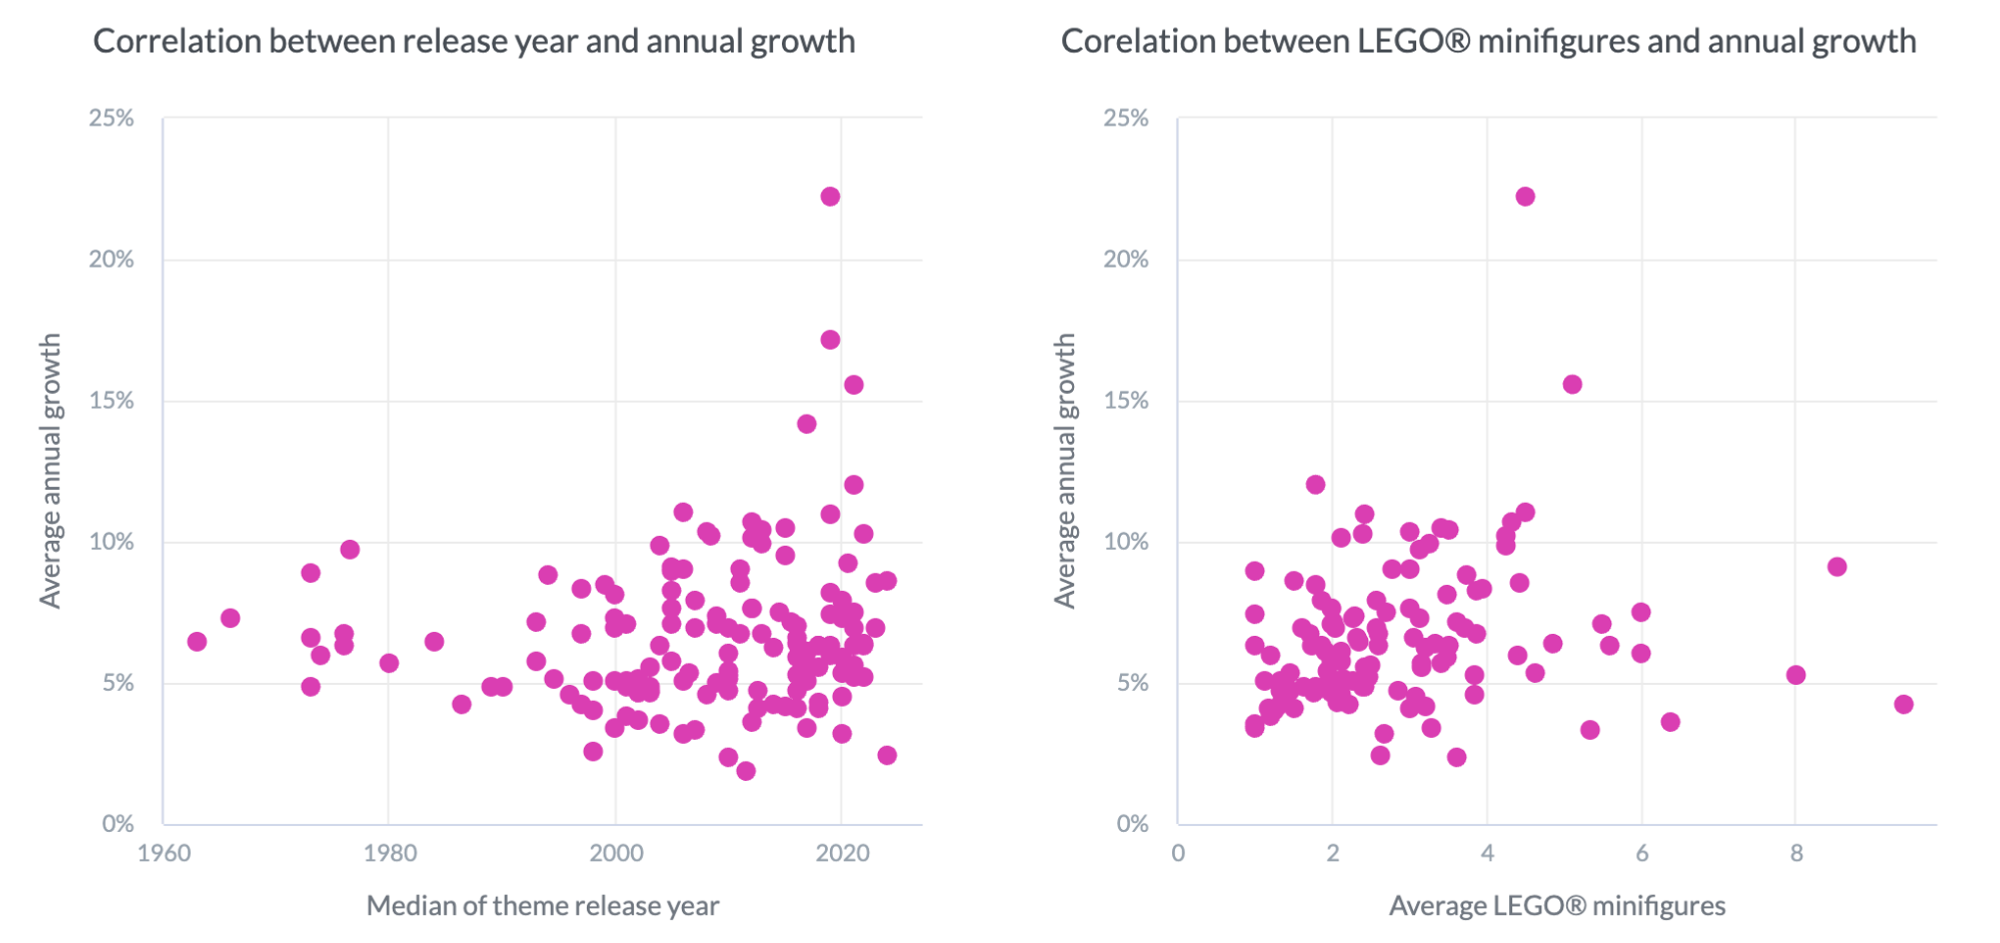 Correlation between annual growth and release year/minifigures